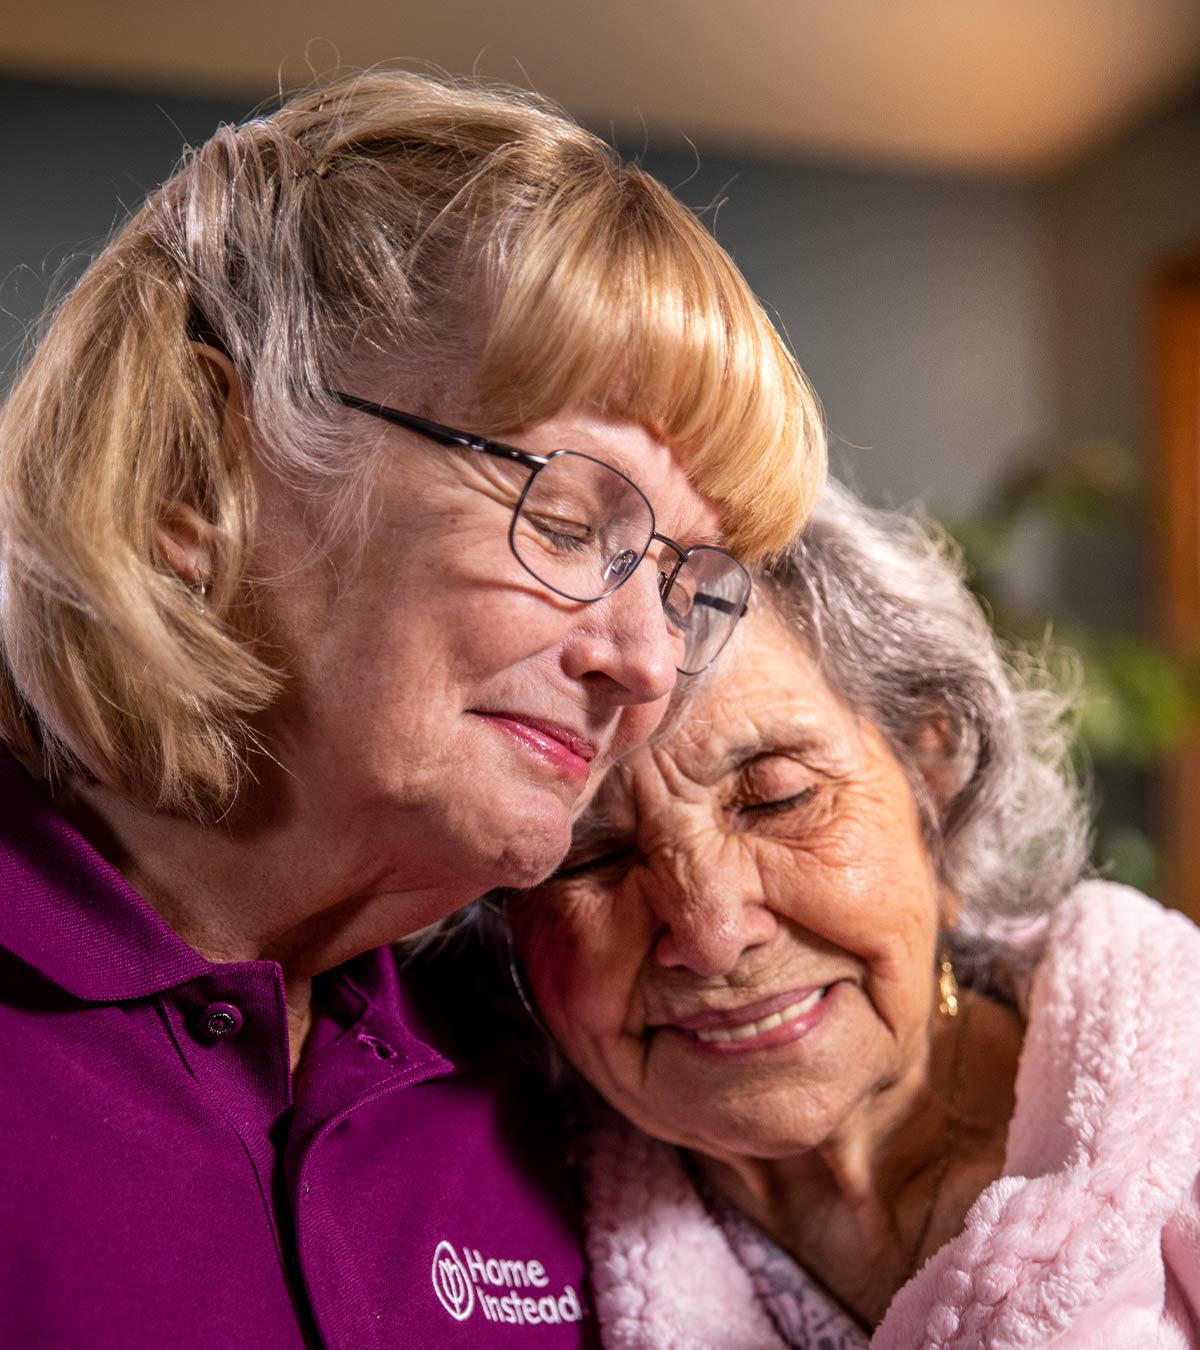 CAREGiver providing in-home senior care services. Home Instead of Colorado Springs, CO provides Elder Care to aging adults. 